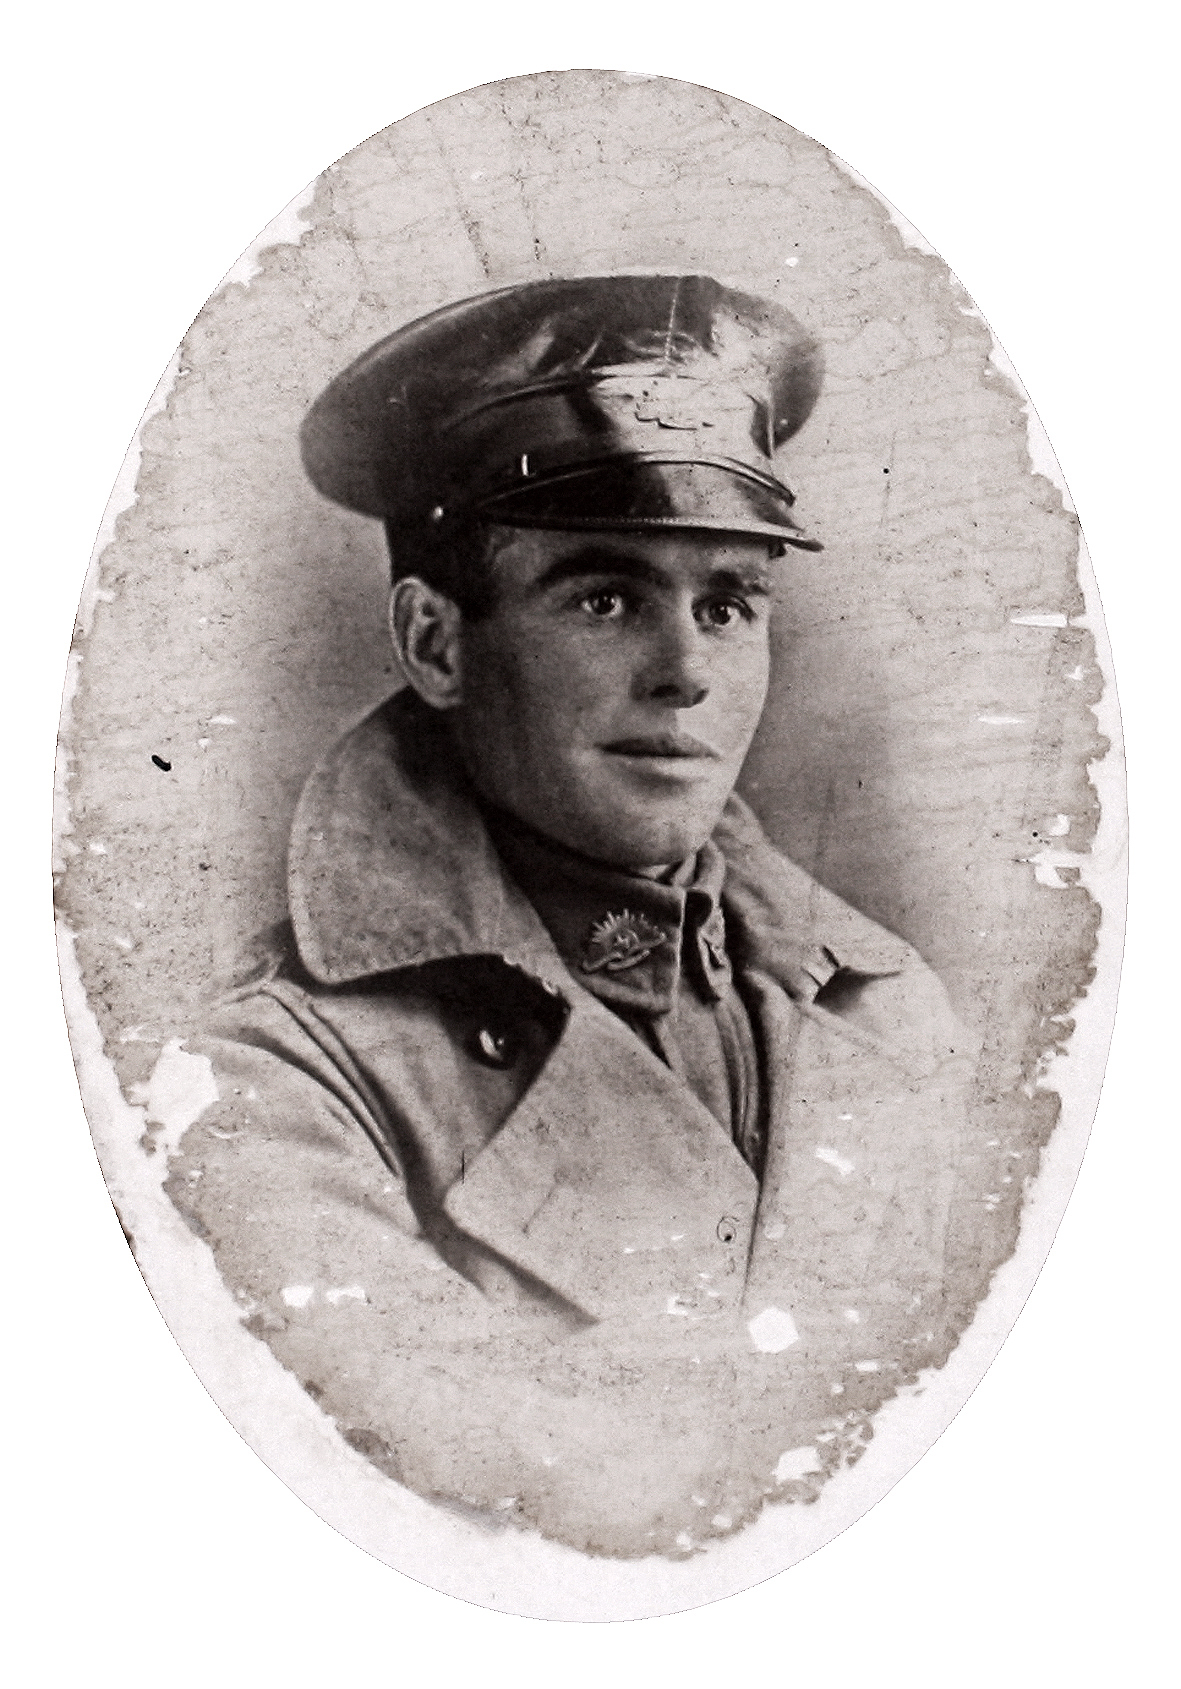 a man in a military uniform posing for the camera